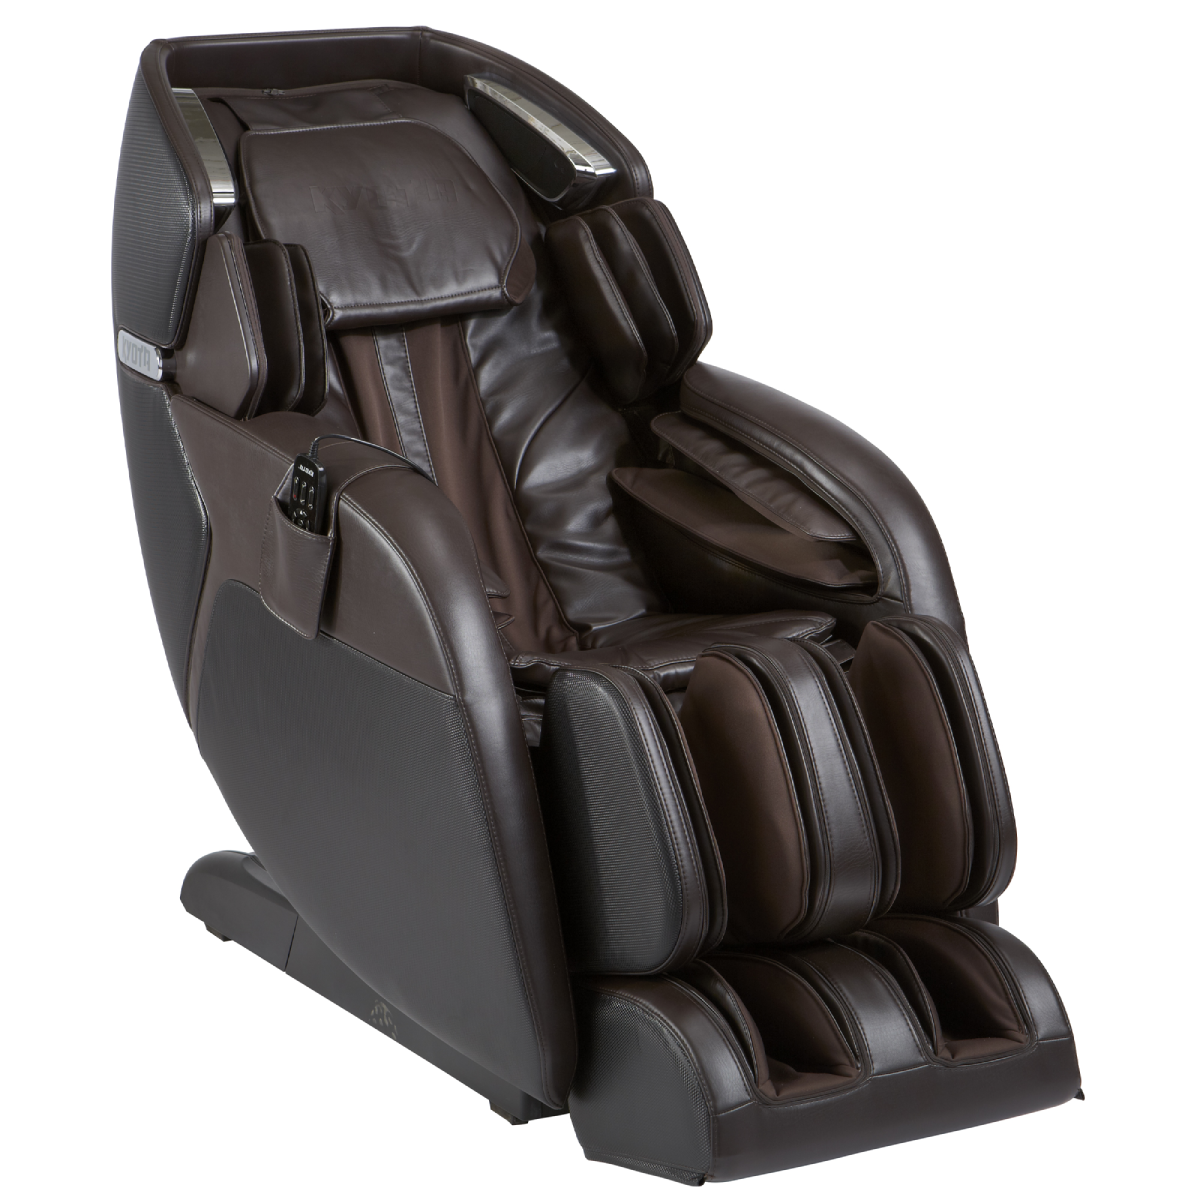 Kyota Kenko 3D/4D Massage Chair M673 in Brown - Home Bars USA